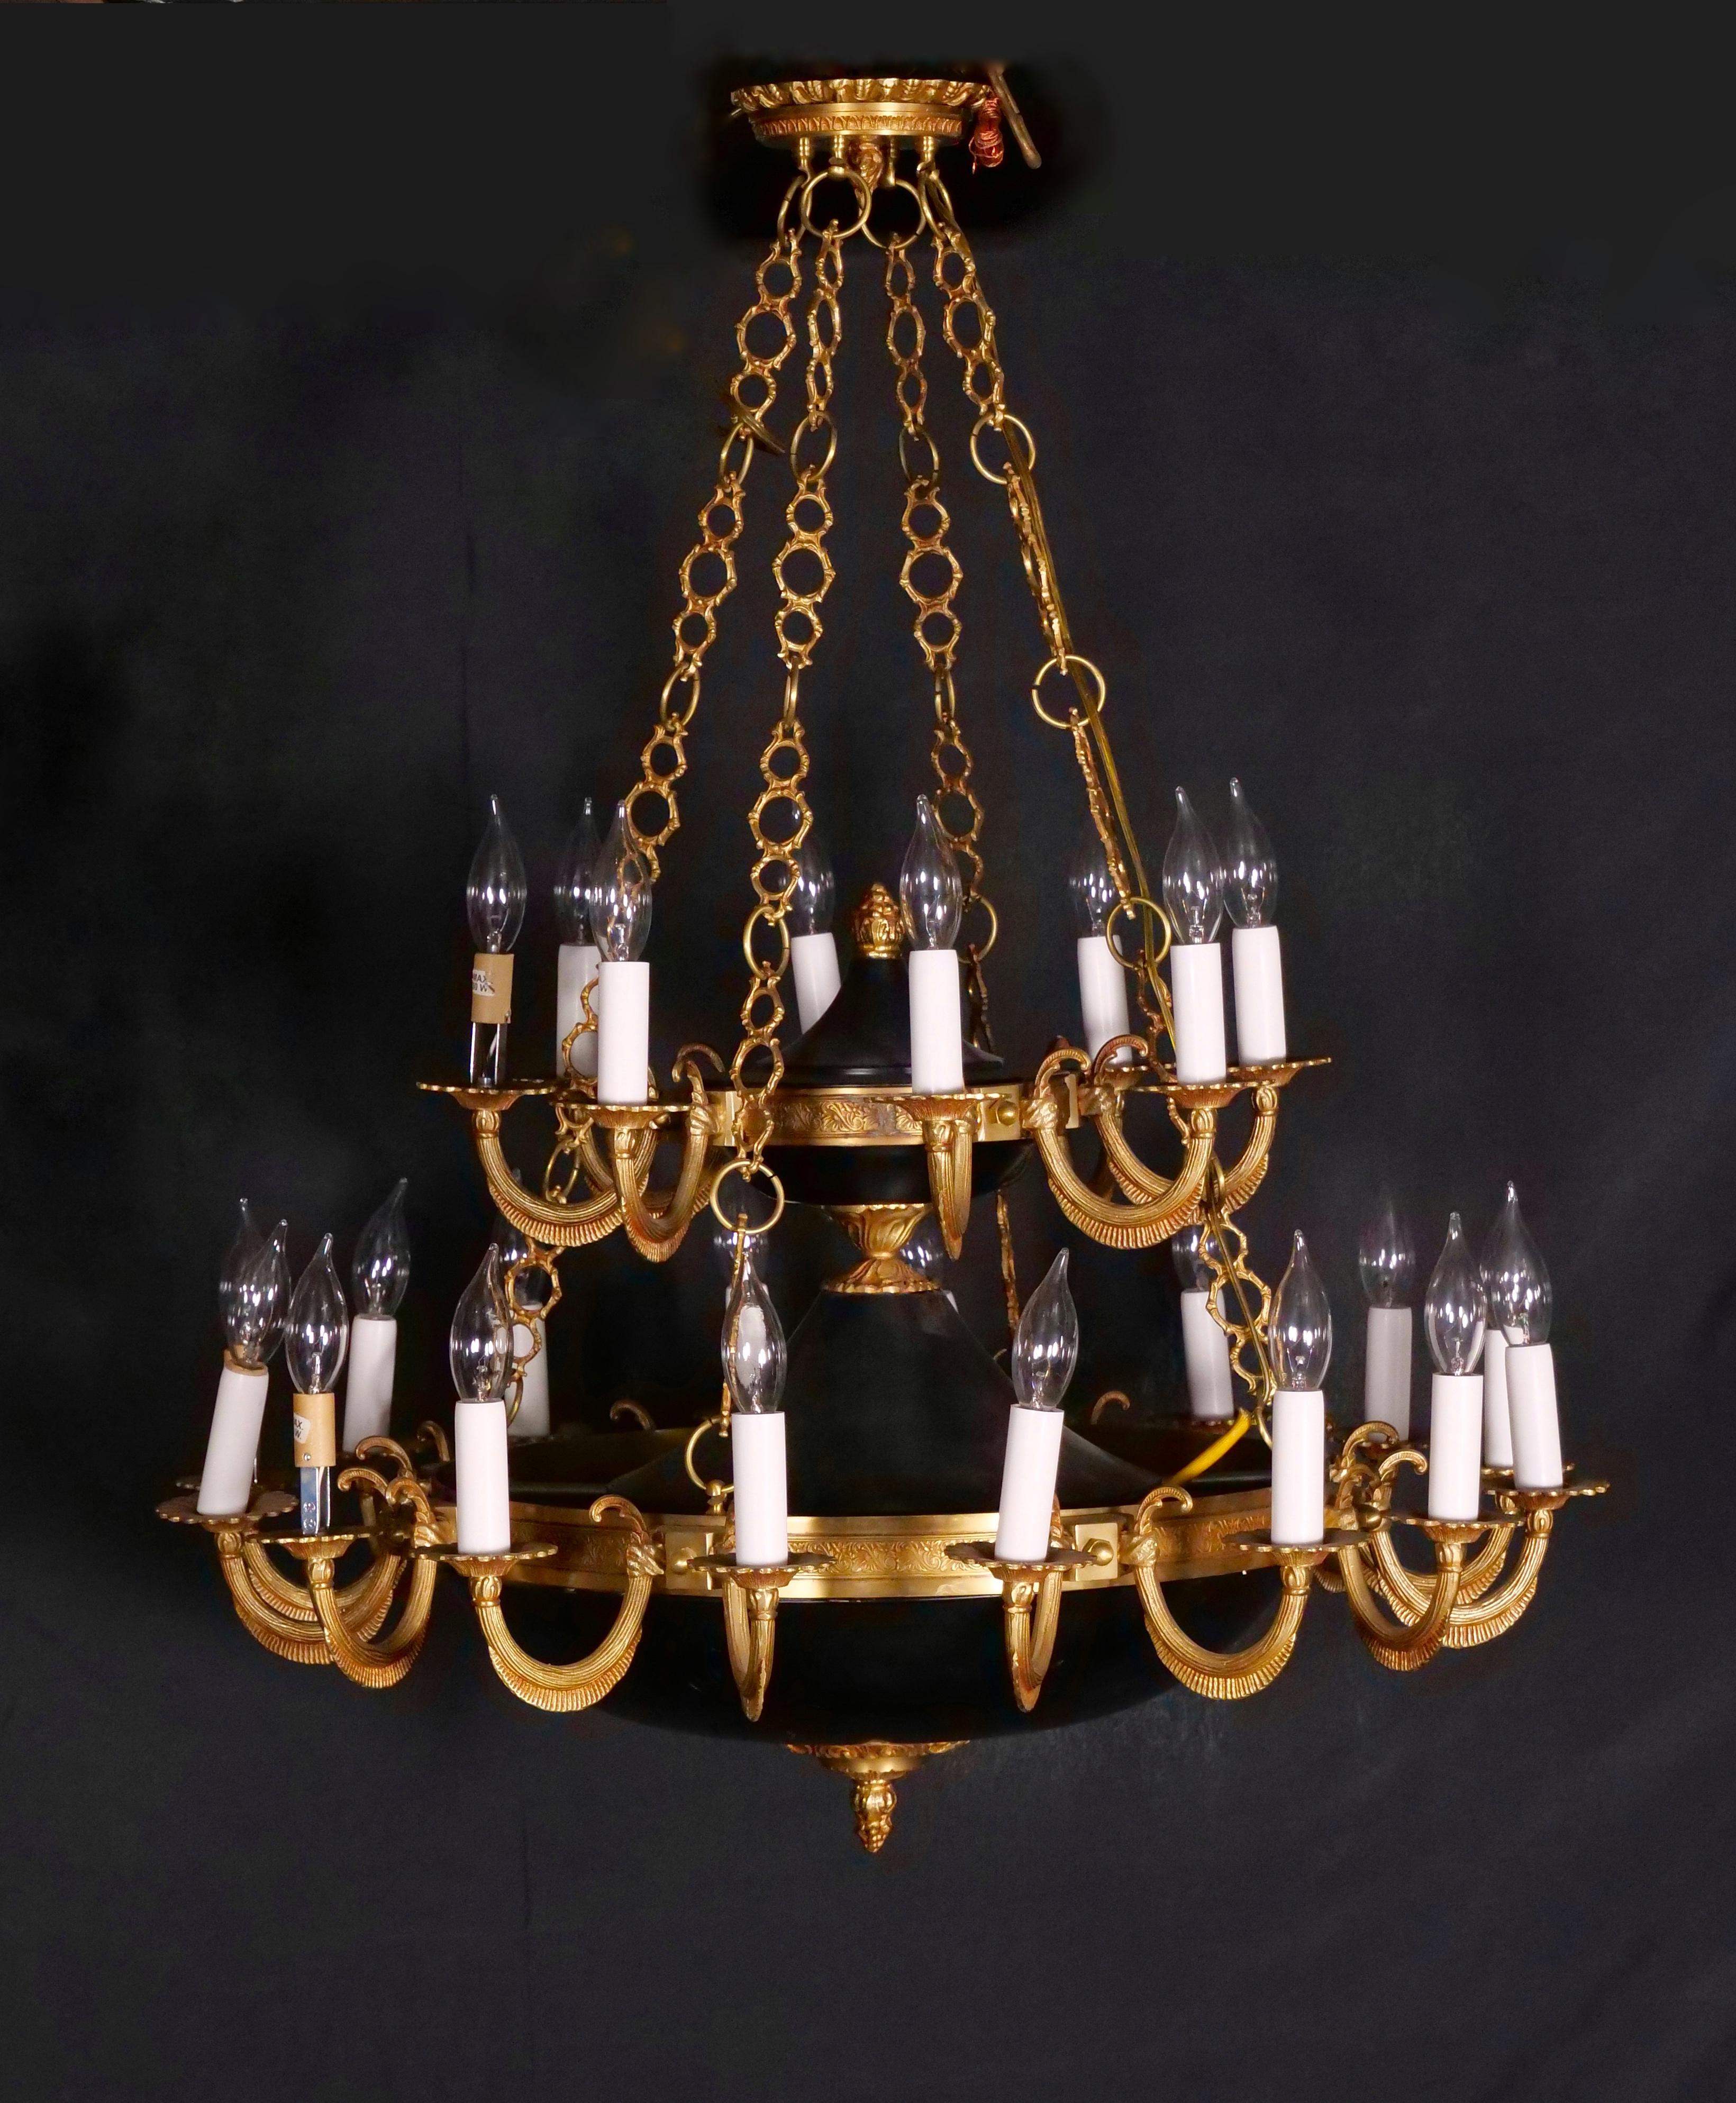 19th Century French Empire Style 24-Light Gilt Bronze / Patinated Chandelier For Sale 2